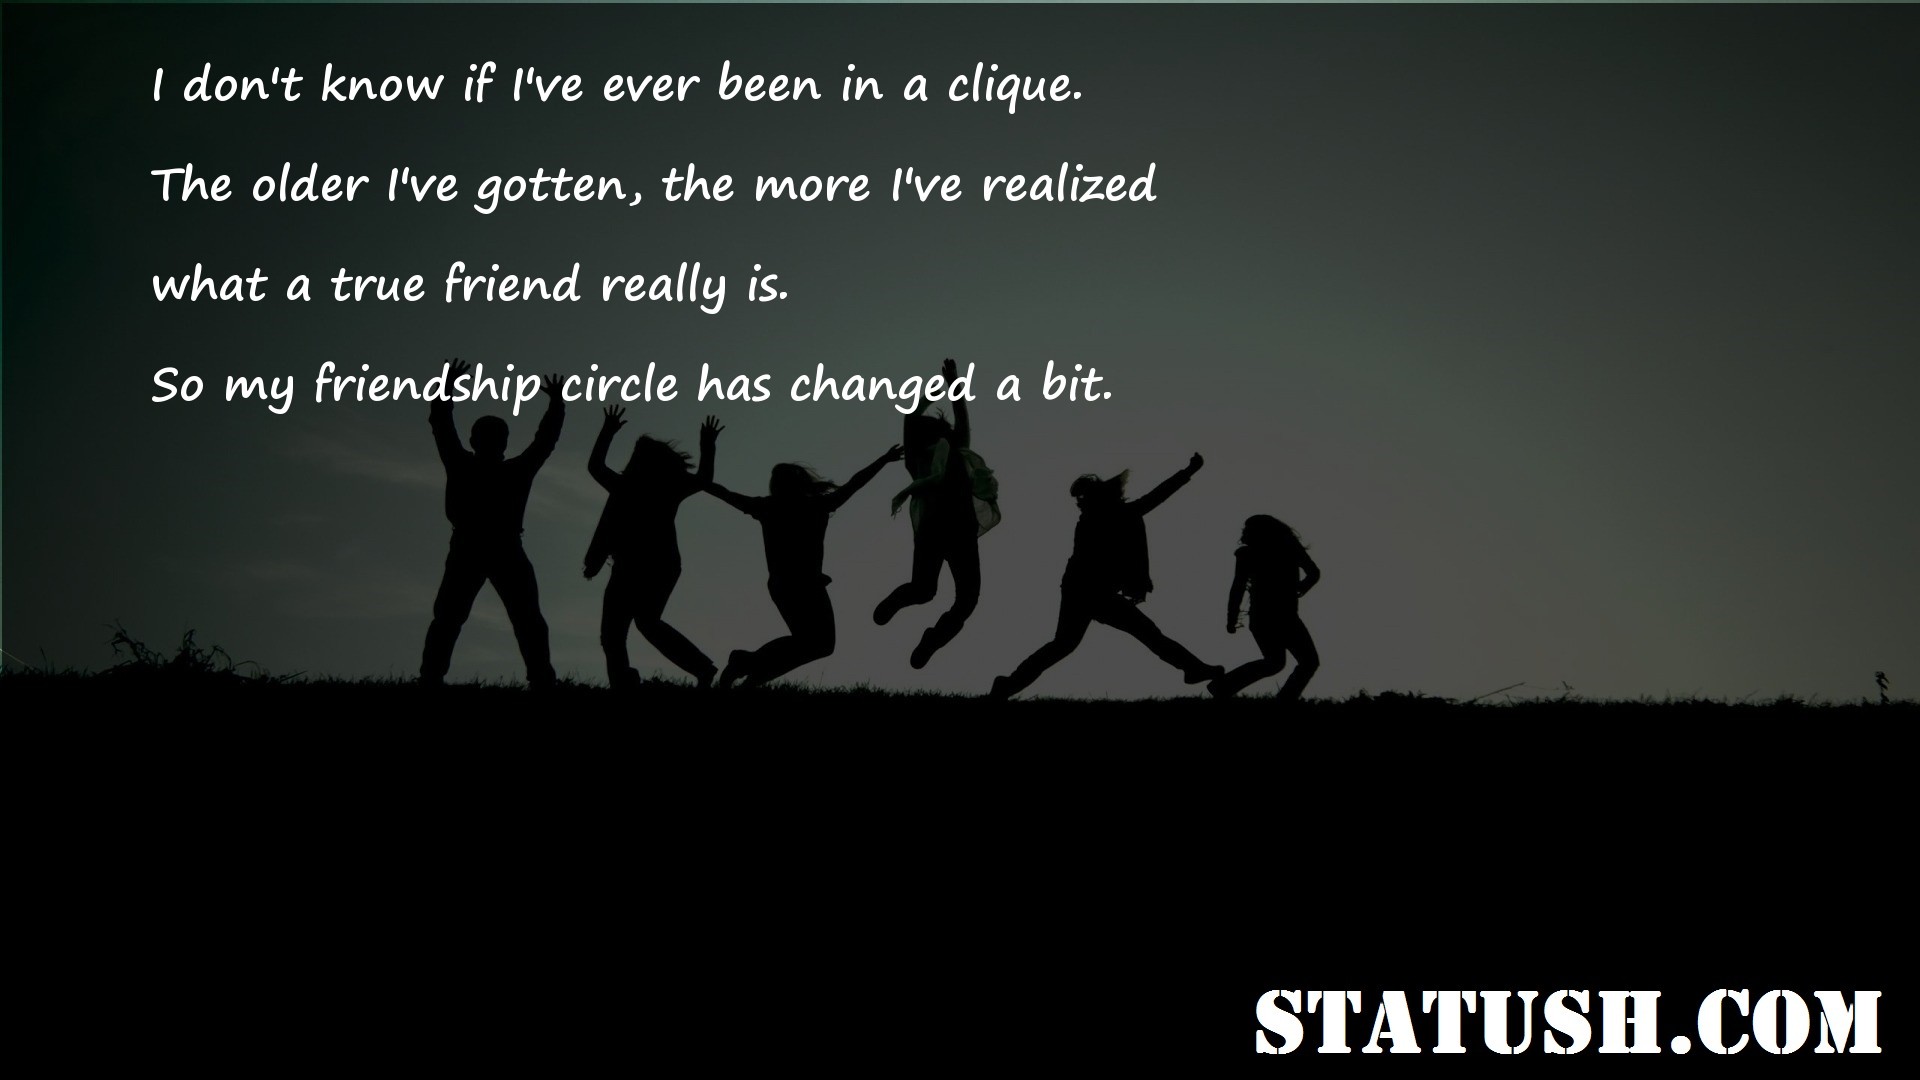 I dont know if Ive ever been in a clique. - Friendship Quotes at statush.com